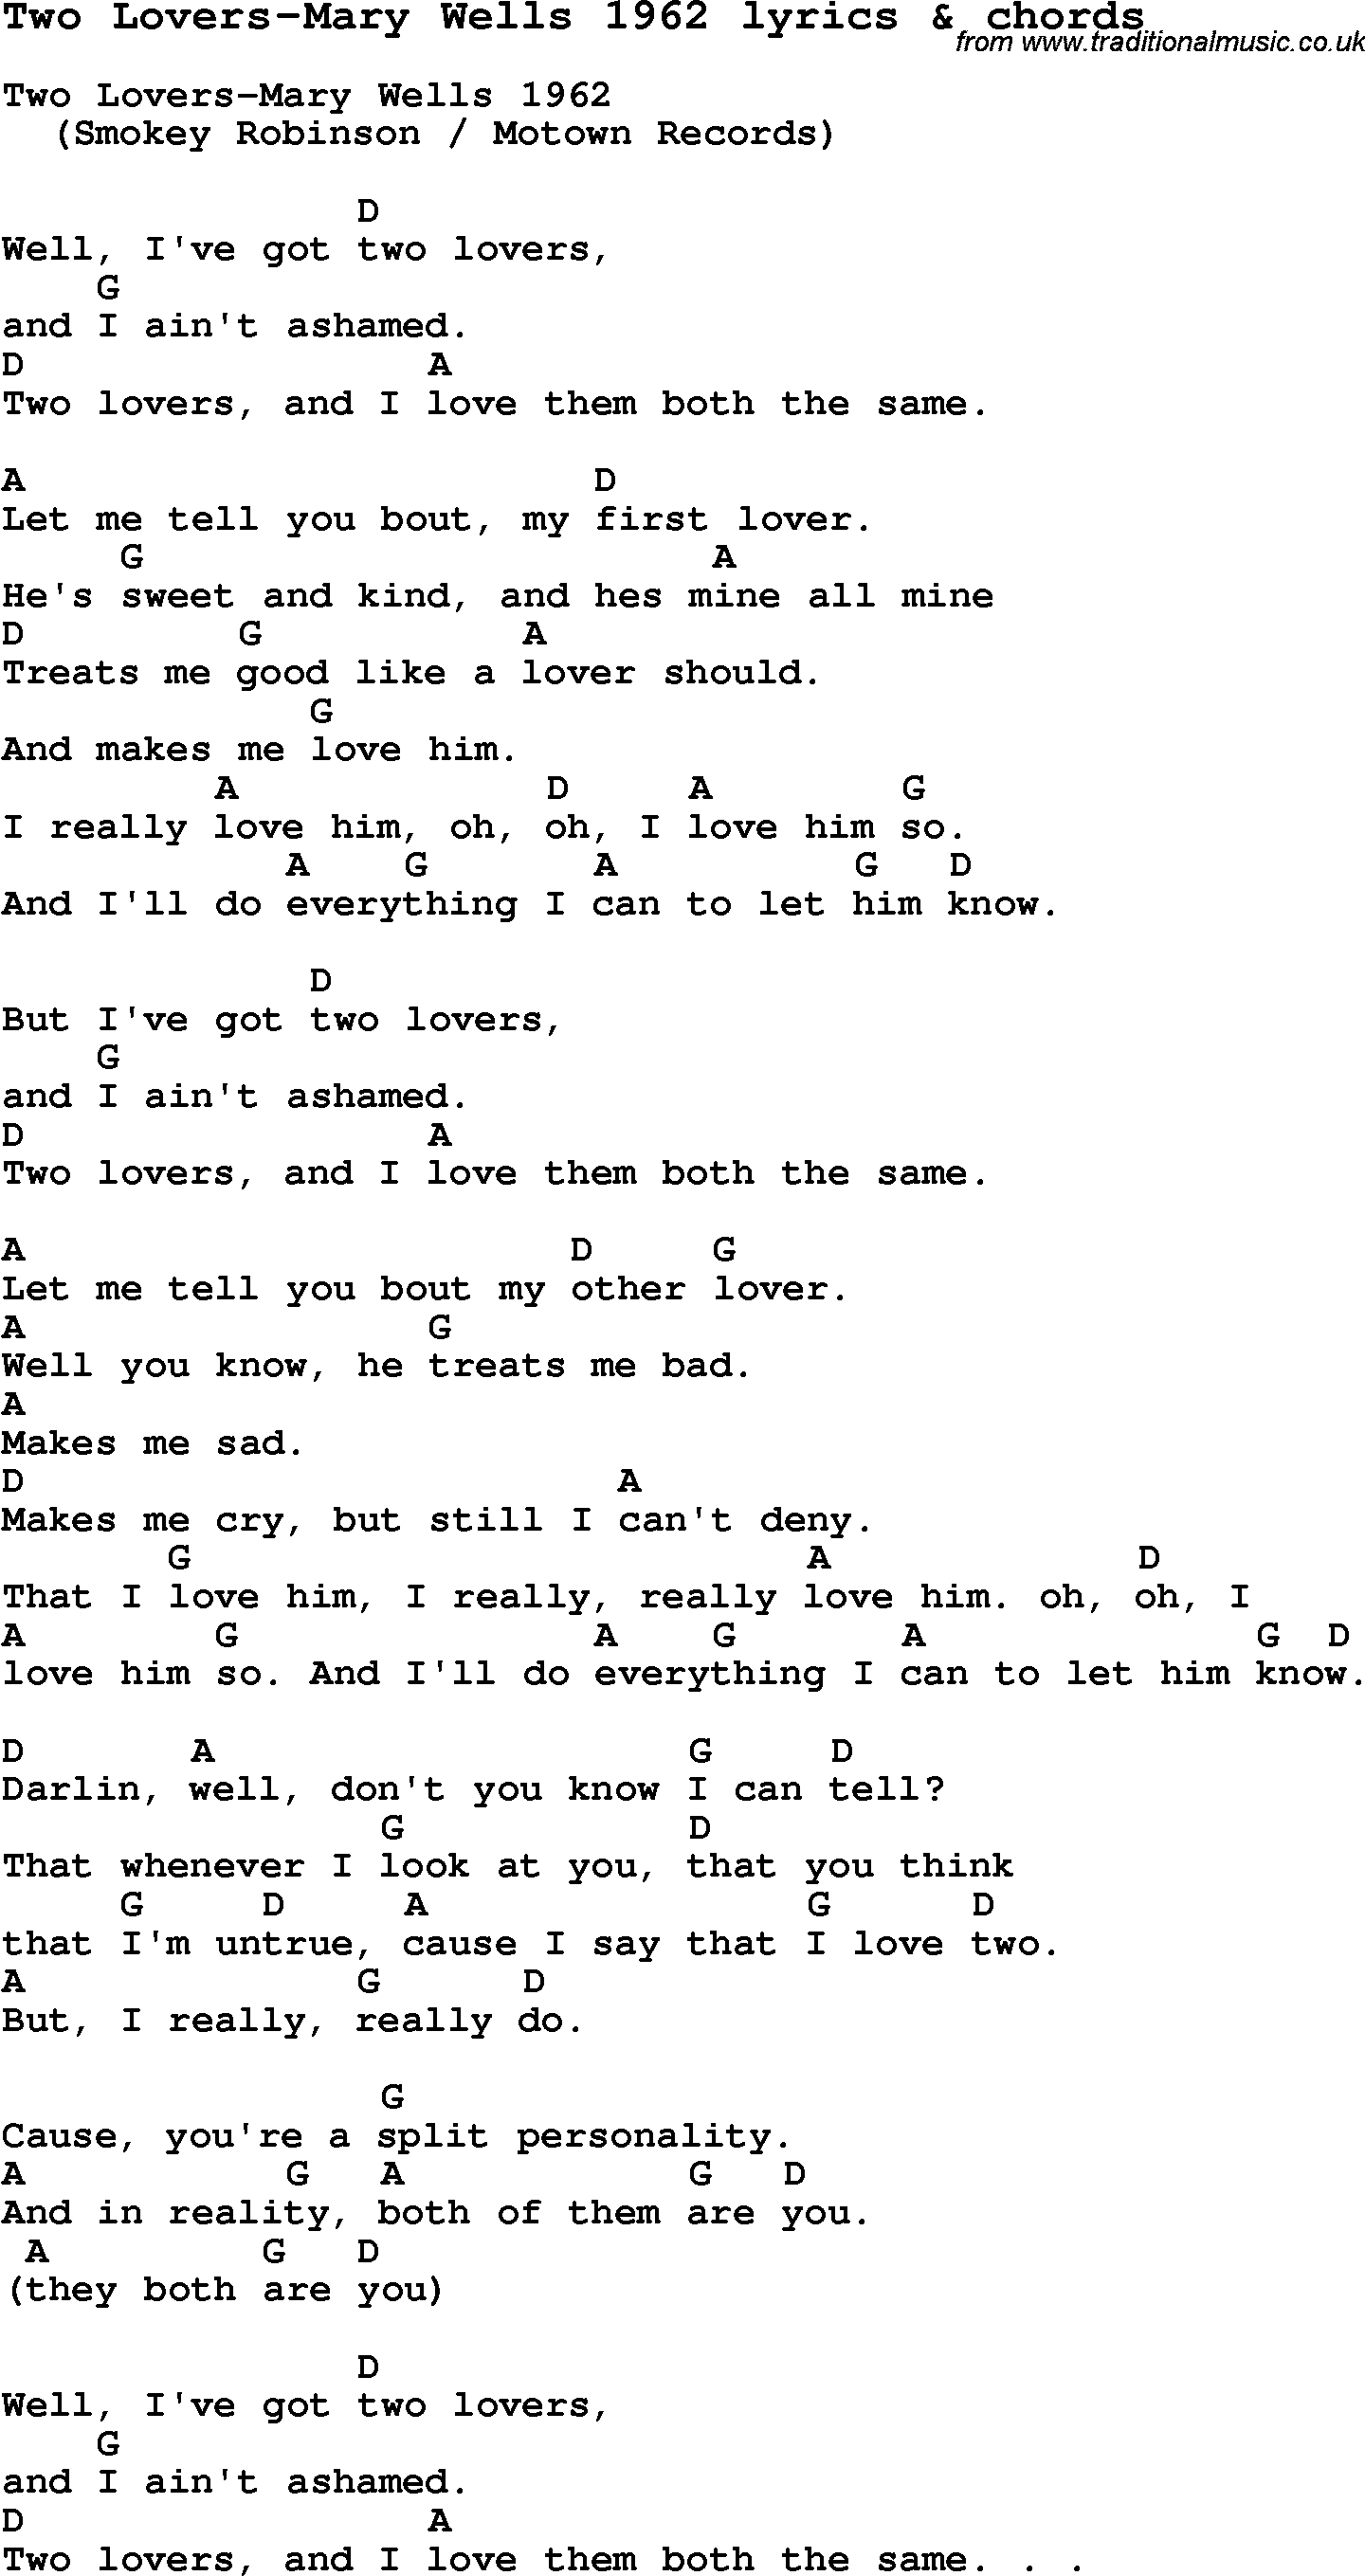 Love Song Lyrics for: Two Lovers-Mary Wells 1962 with chords for Ukulele, Guitar Banjo etc.